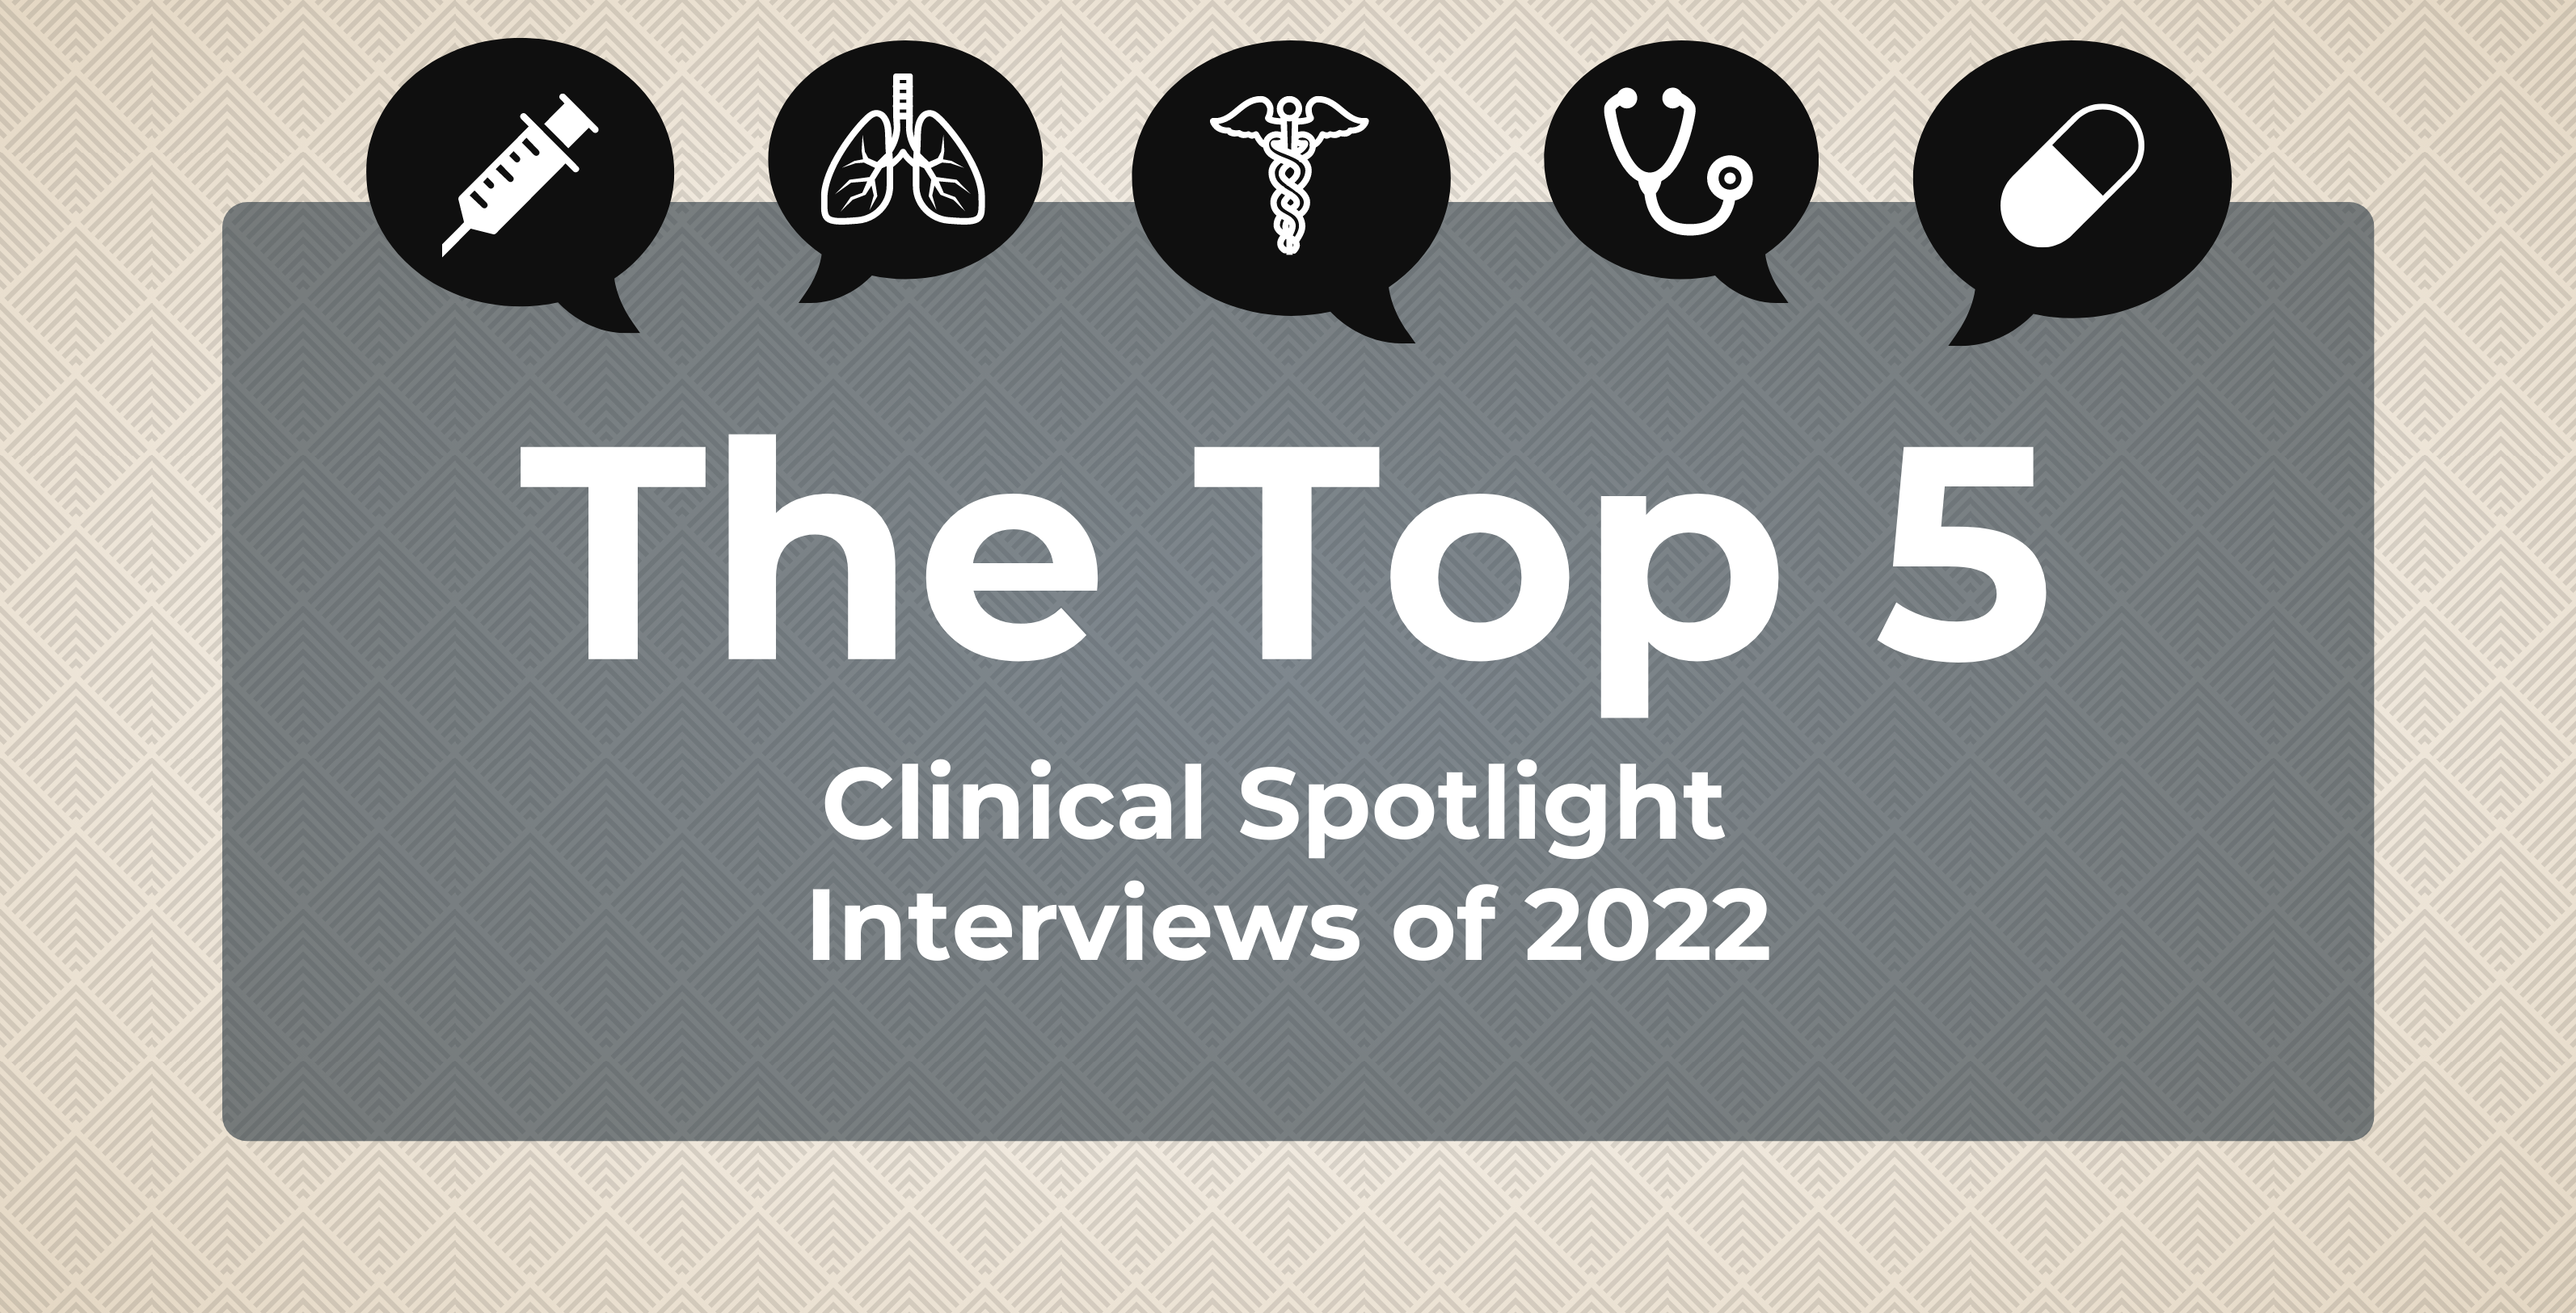 Graphic with the words "Top 5 Clinical Spotlight Interviews of 2022"